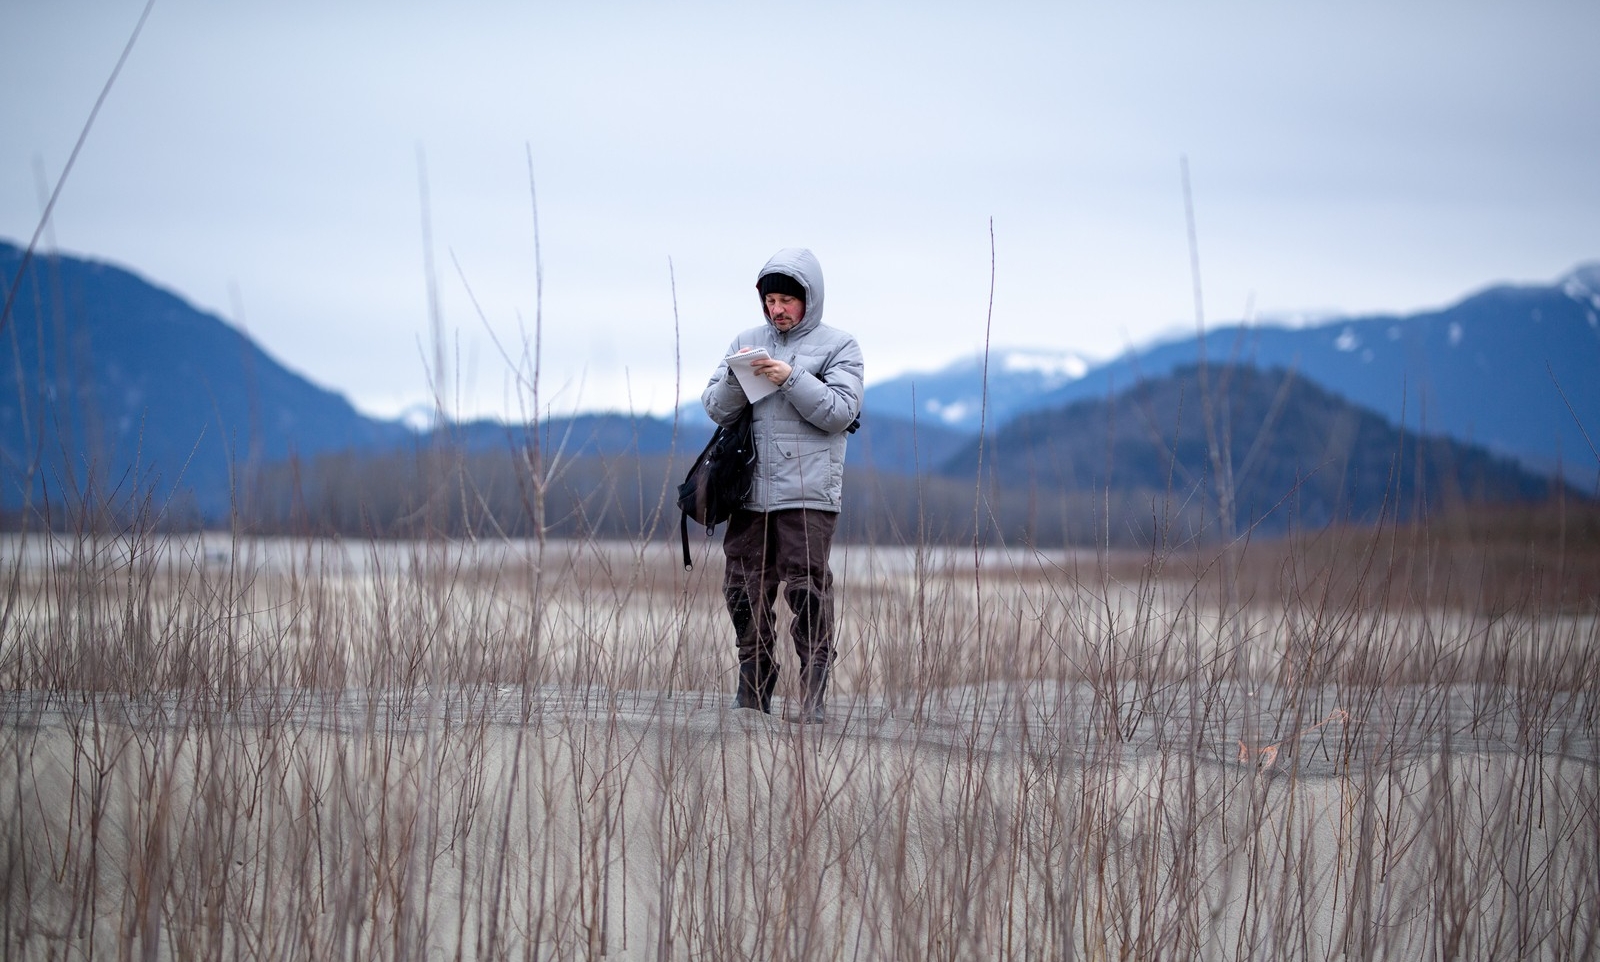 A man with a light grey hooded jacked and black pants stands in a field with snow-capped mountains behind him. He is taking notes on a pad of paper.